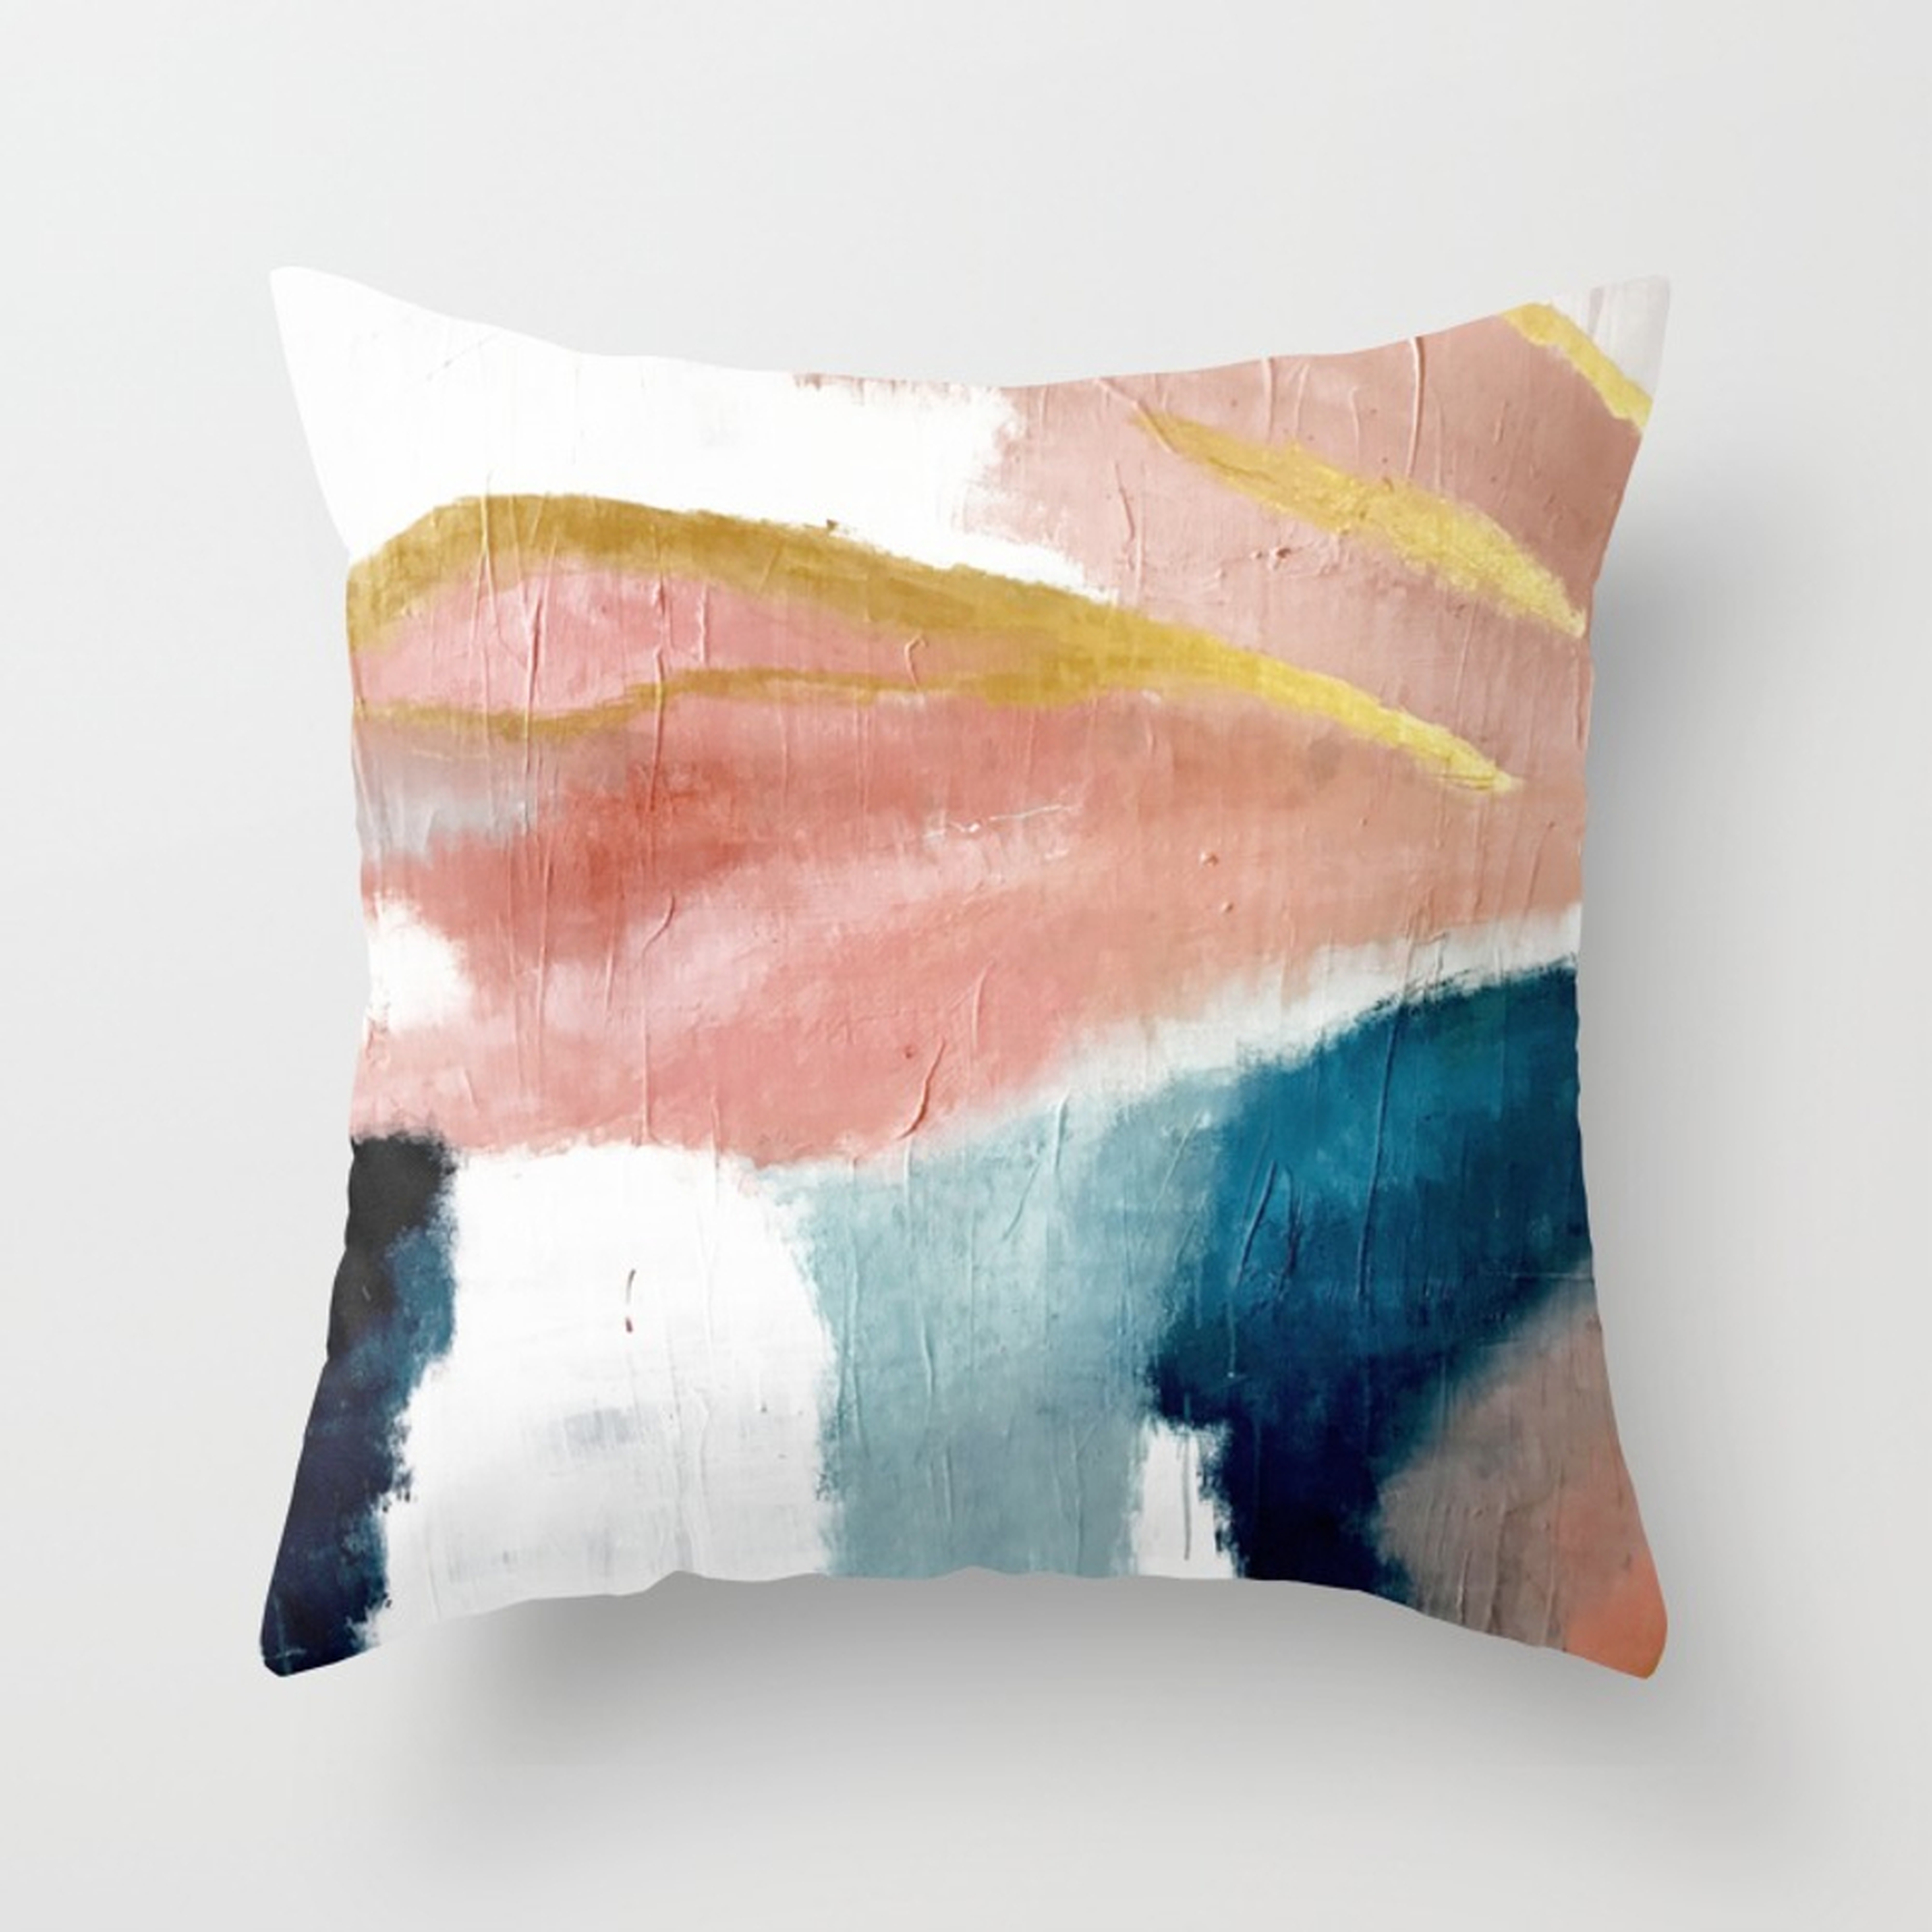 Exhale: a pretty, minimal, acrylic piece in pinks, blues, and gold Throw Pillow - Outdoor Cover (18" x 18") with pillow insert by Blushingbrushstudio - Society6